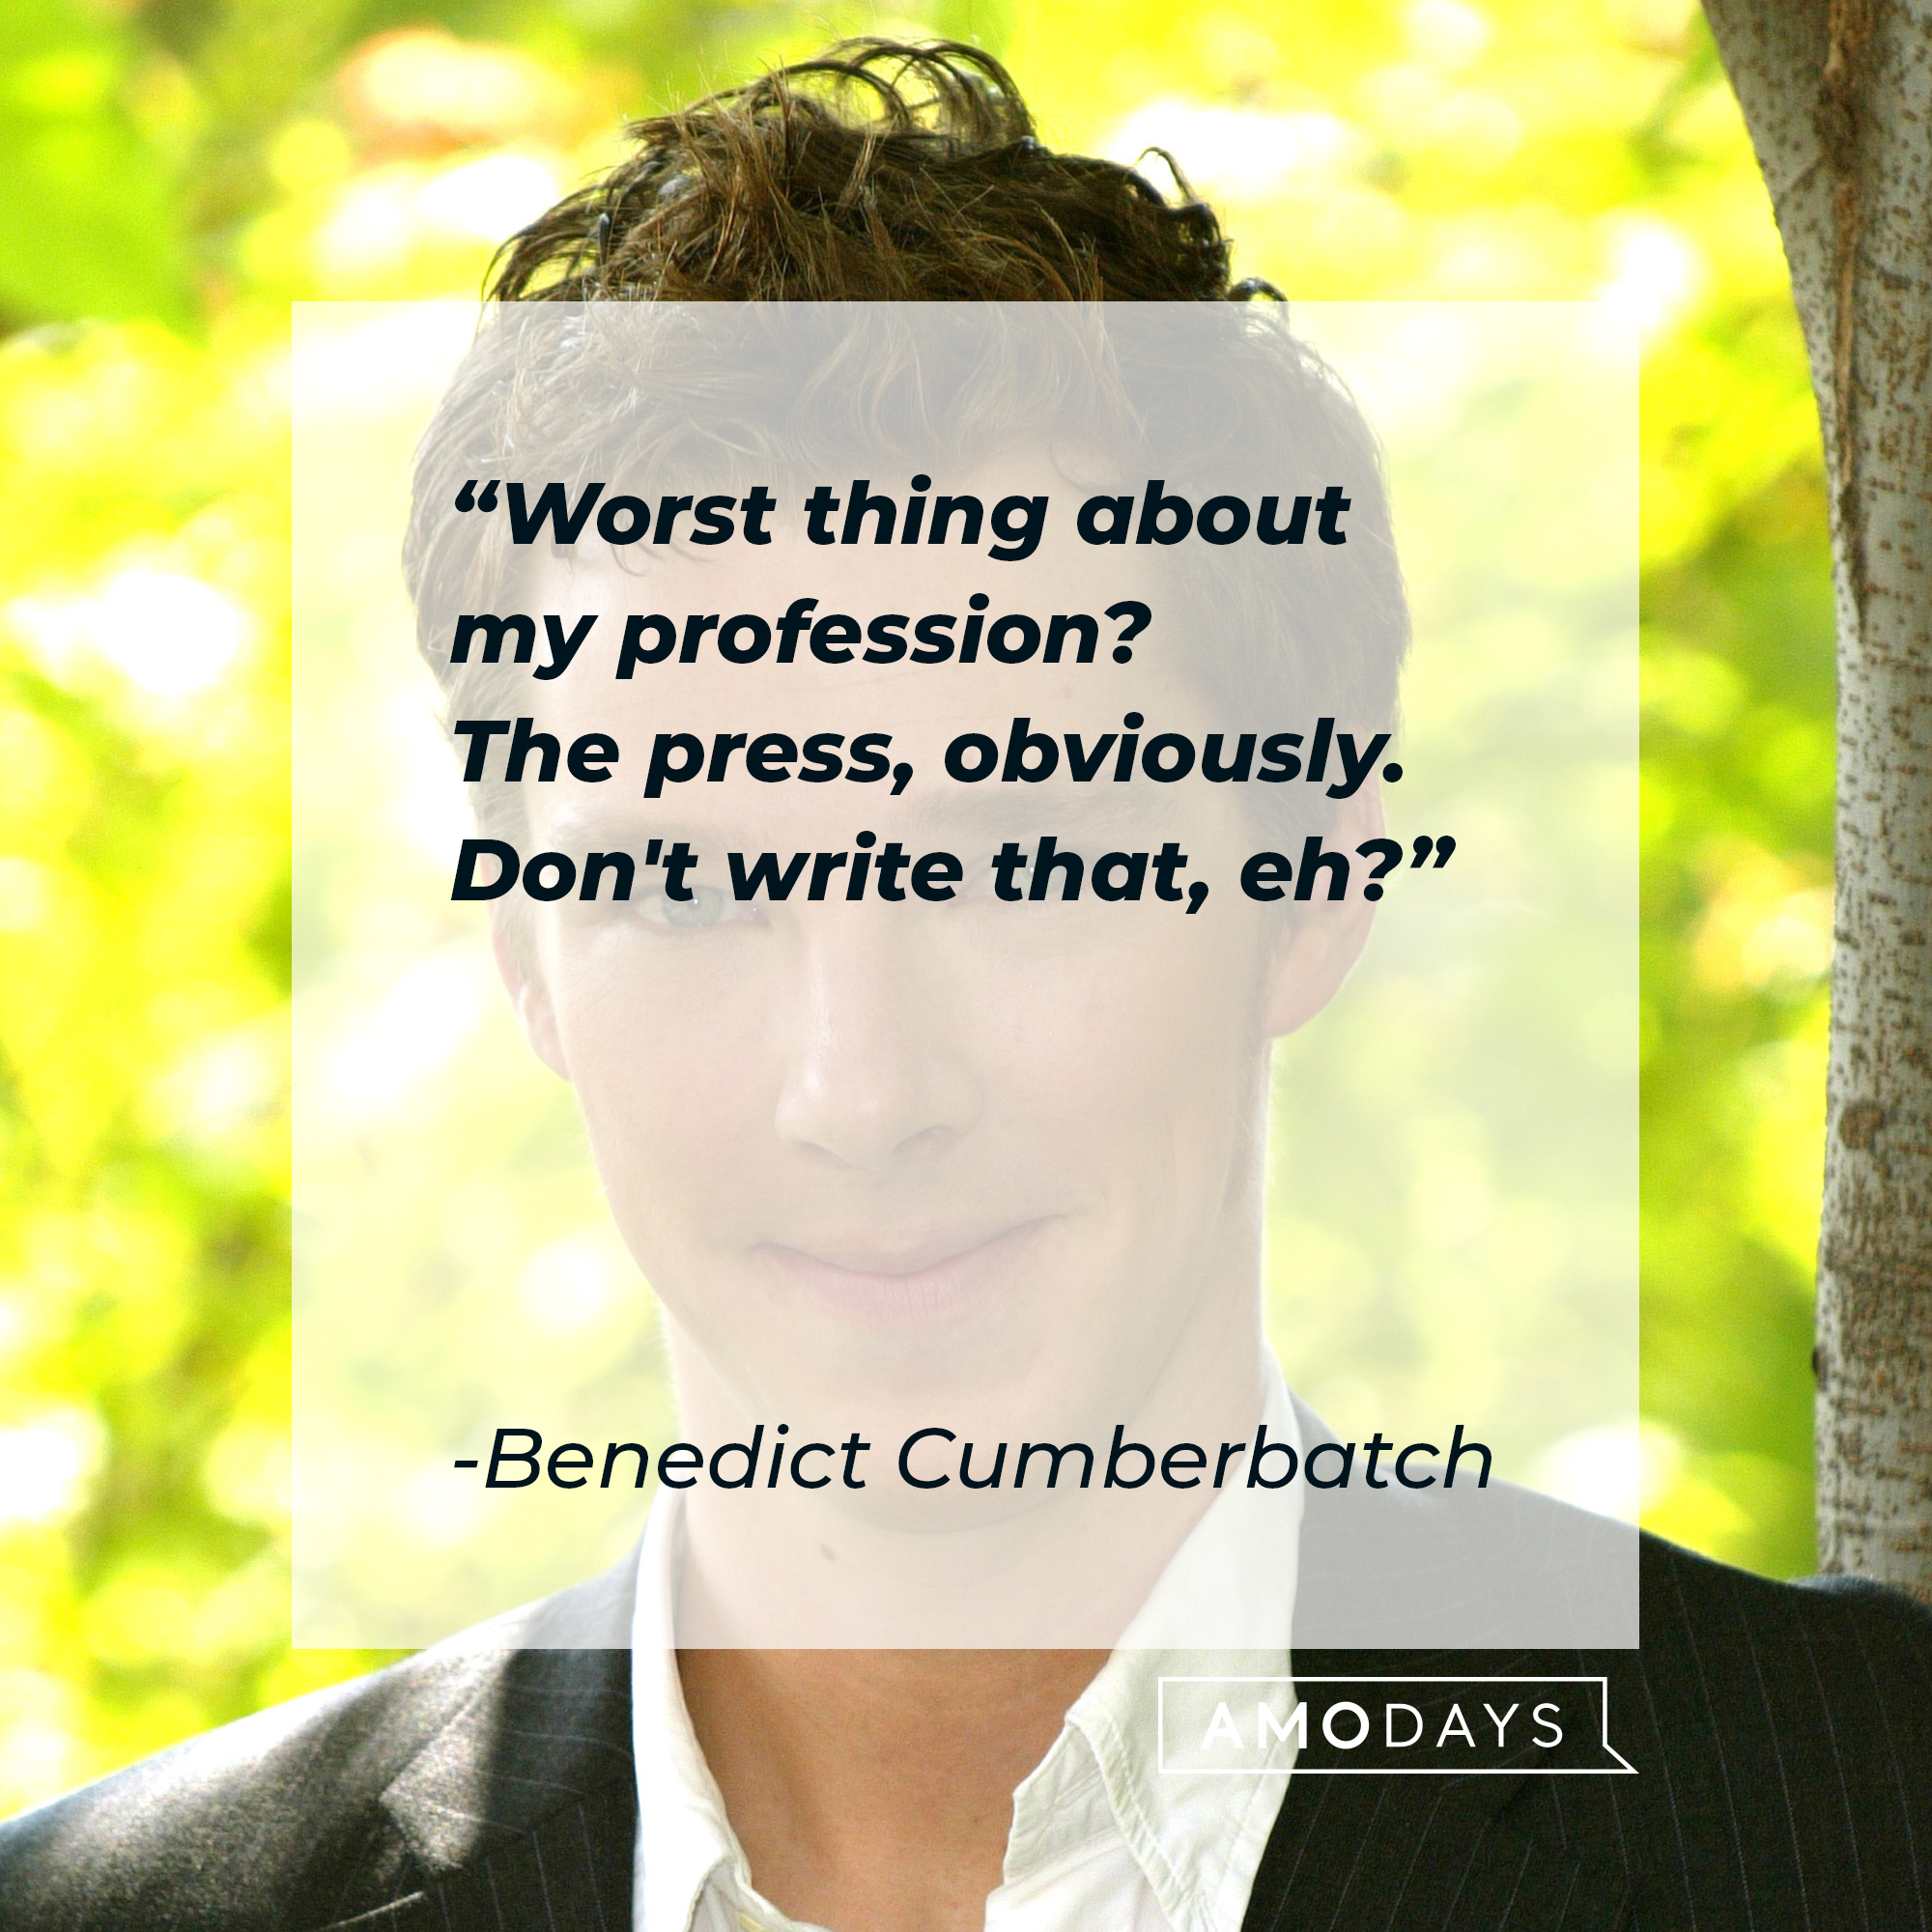 Benedict Cumberbatch, with his quote:: “Worst thing about my profession? The press, obviously. Don't write that, eh?" | Source: Getty Images